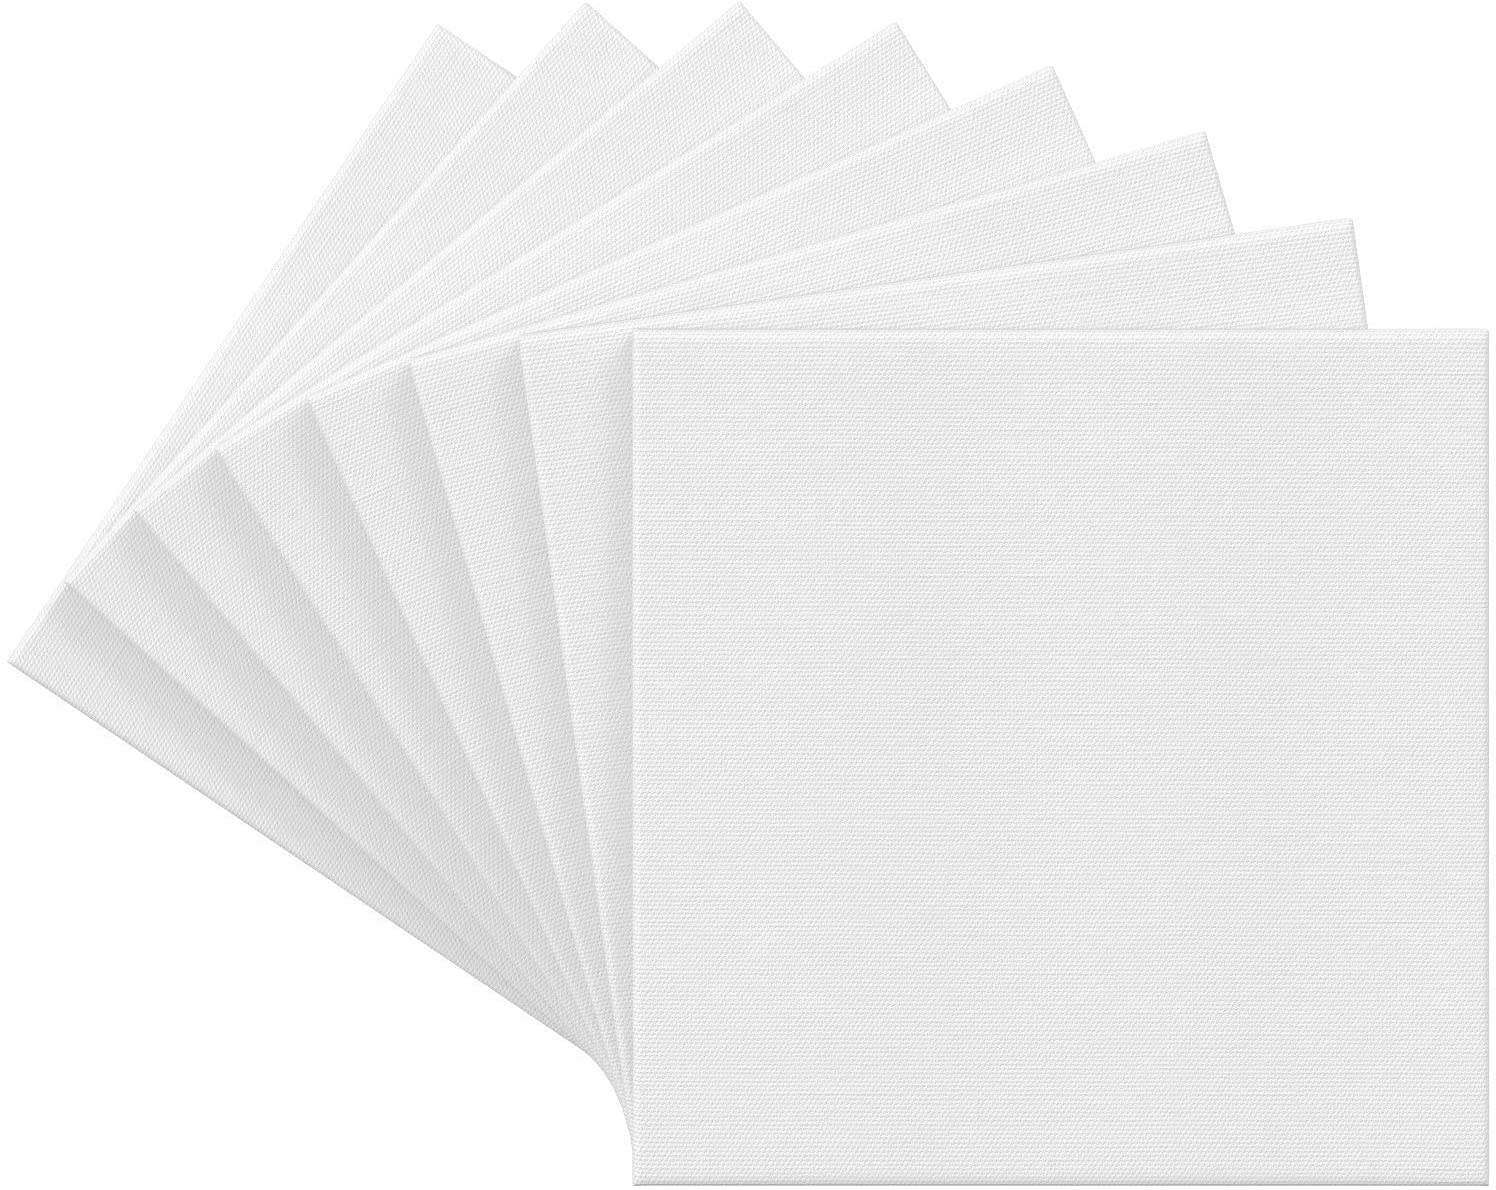 Arteza Paint Canvases for Painting, Pack of 12, 8 x Nigeria